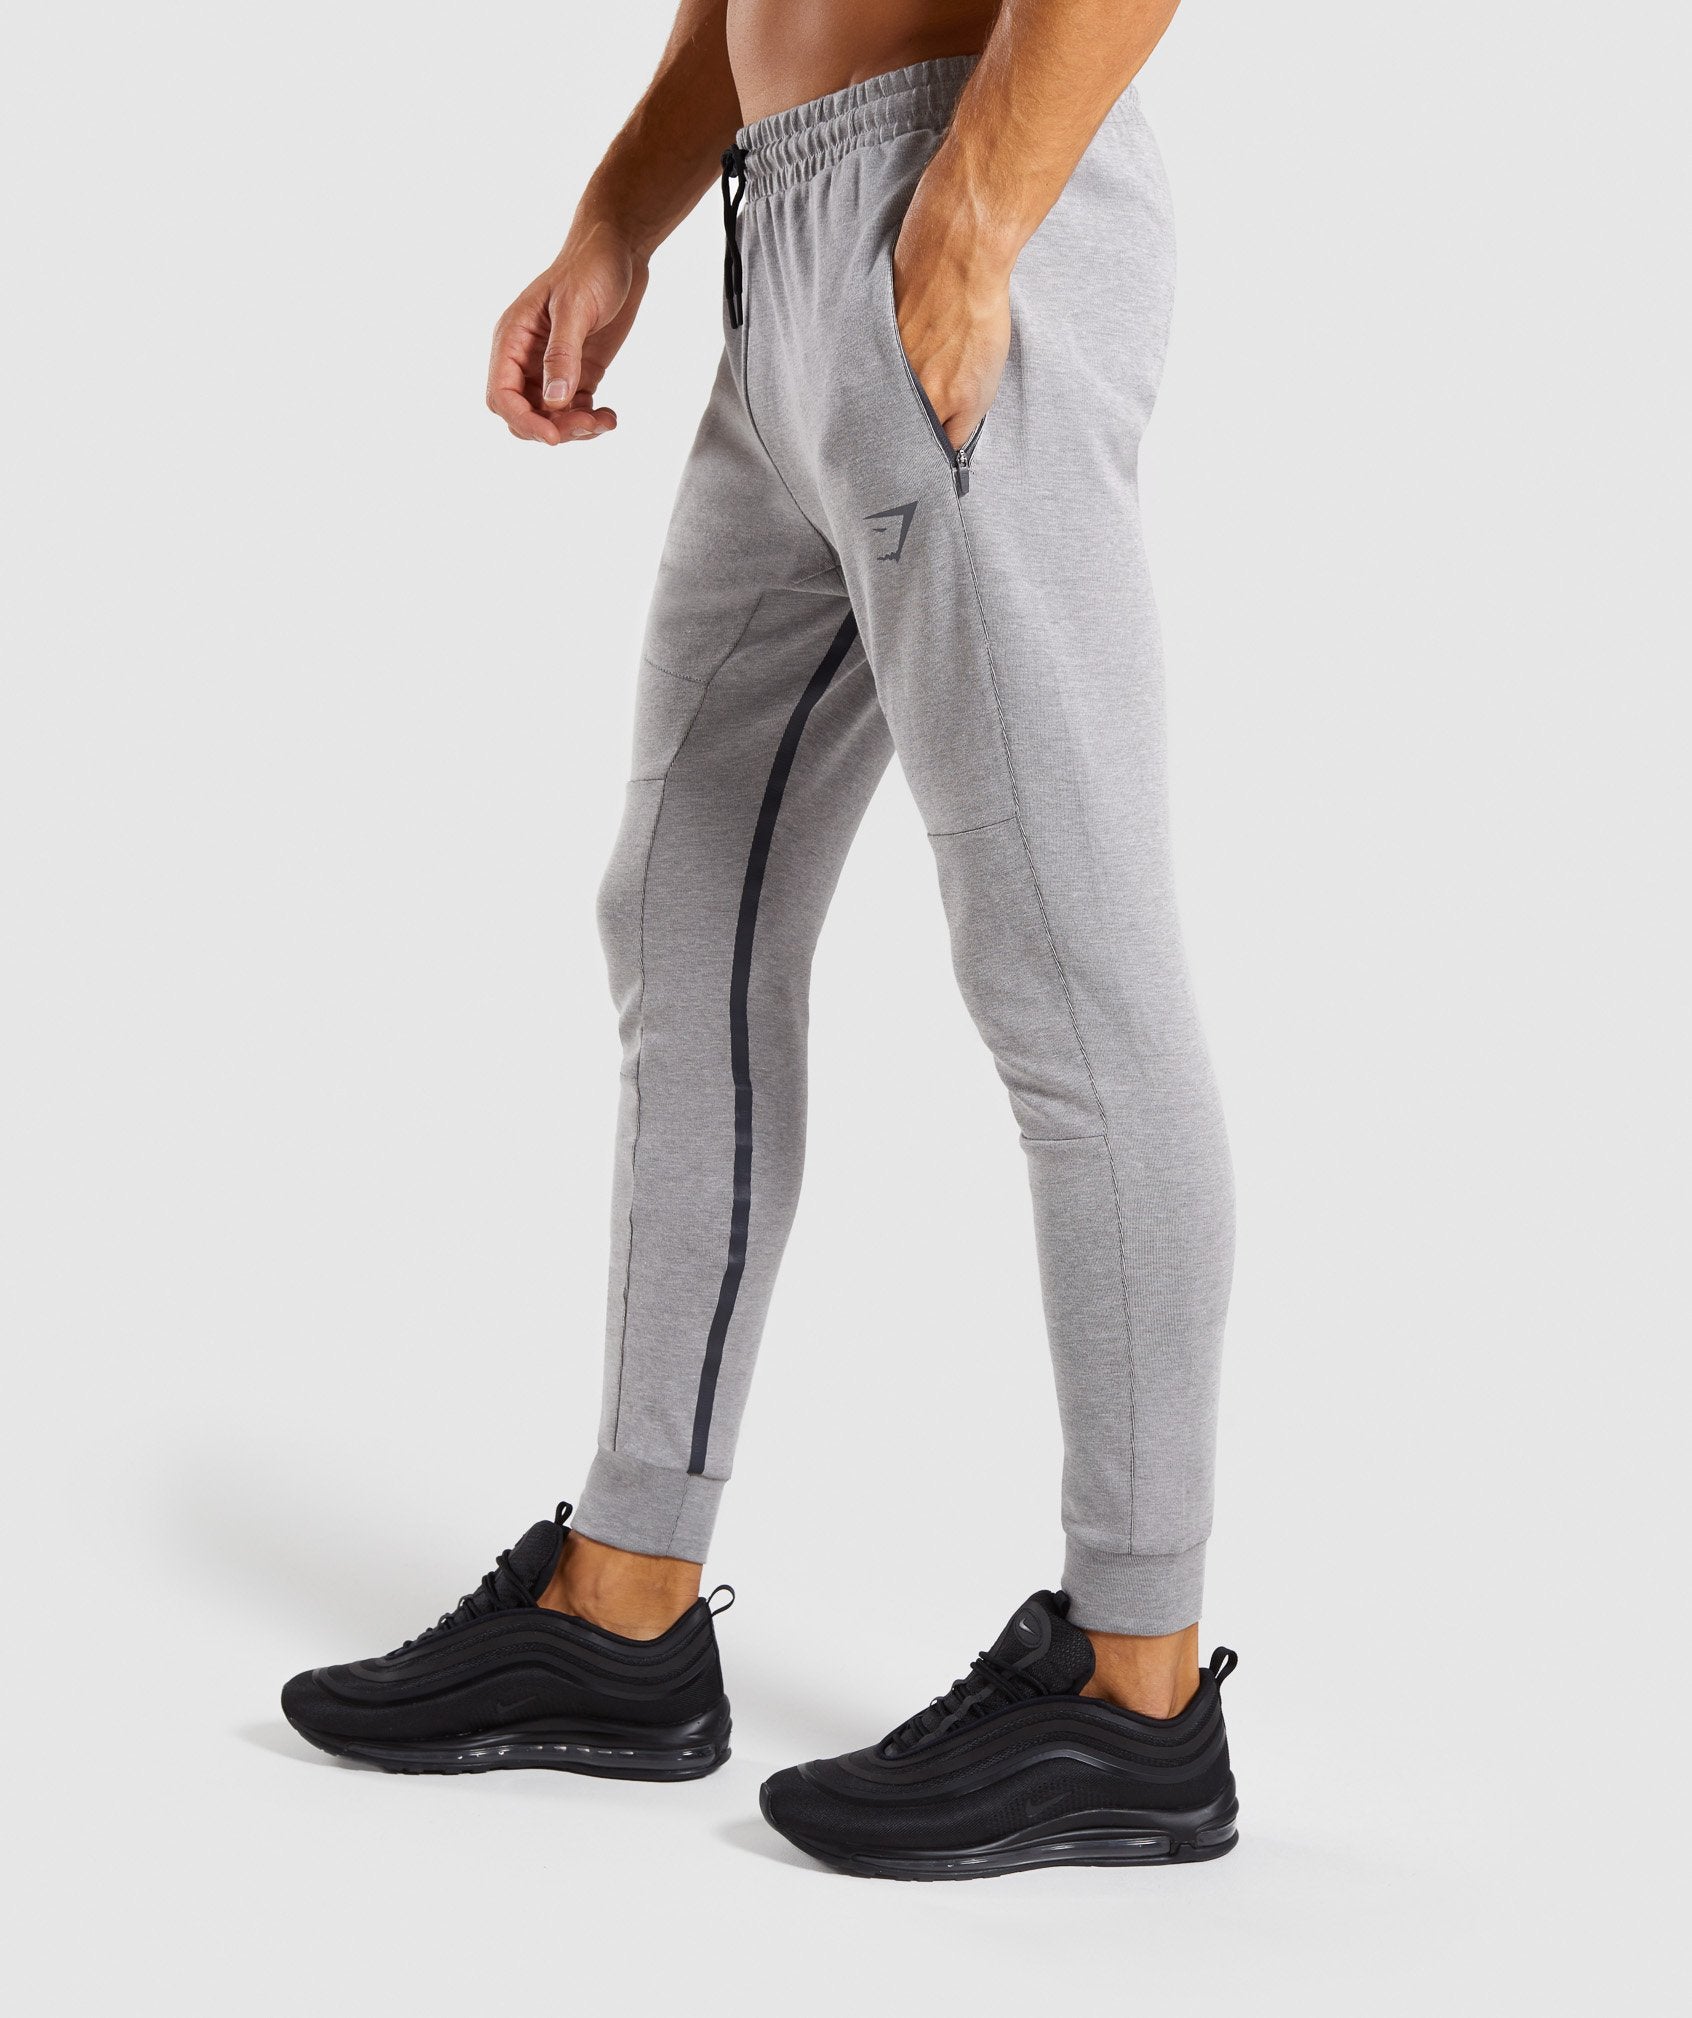 Take Over Bottoms in Light Grey Marl - view 3